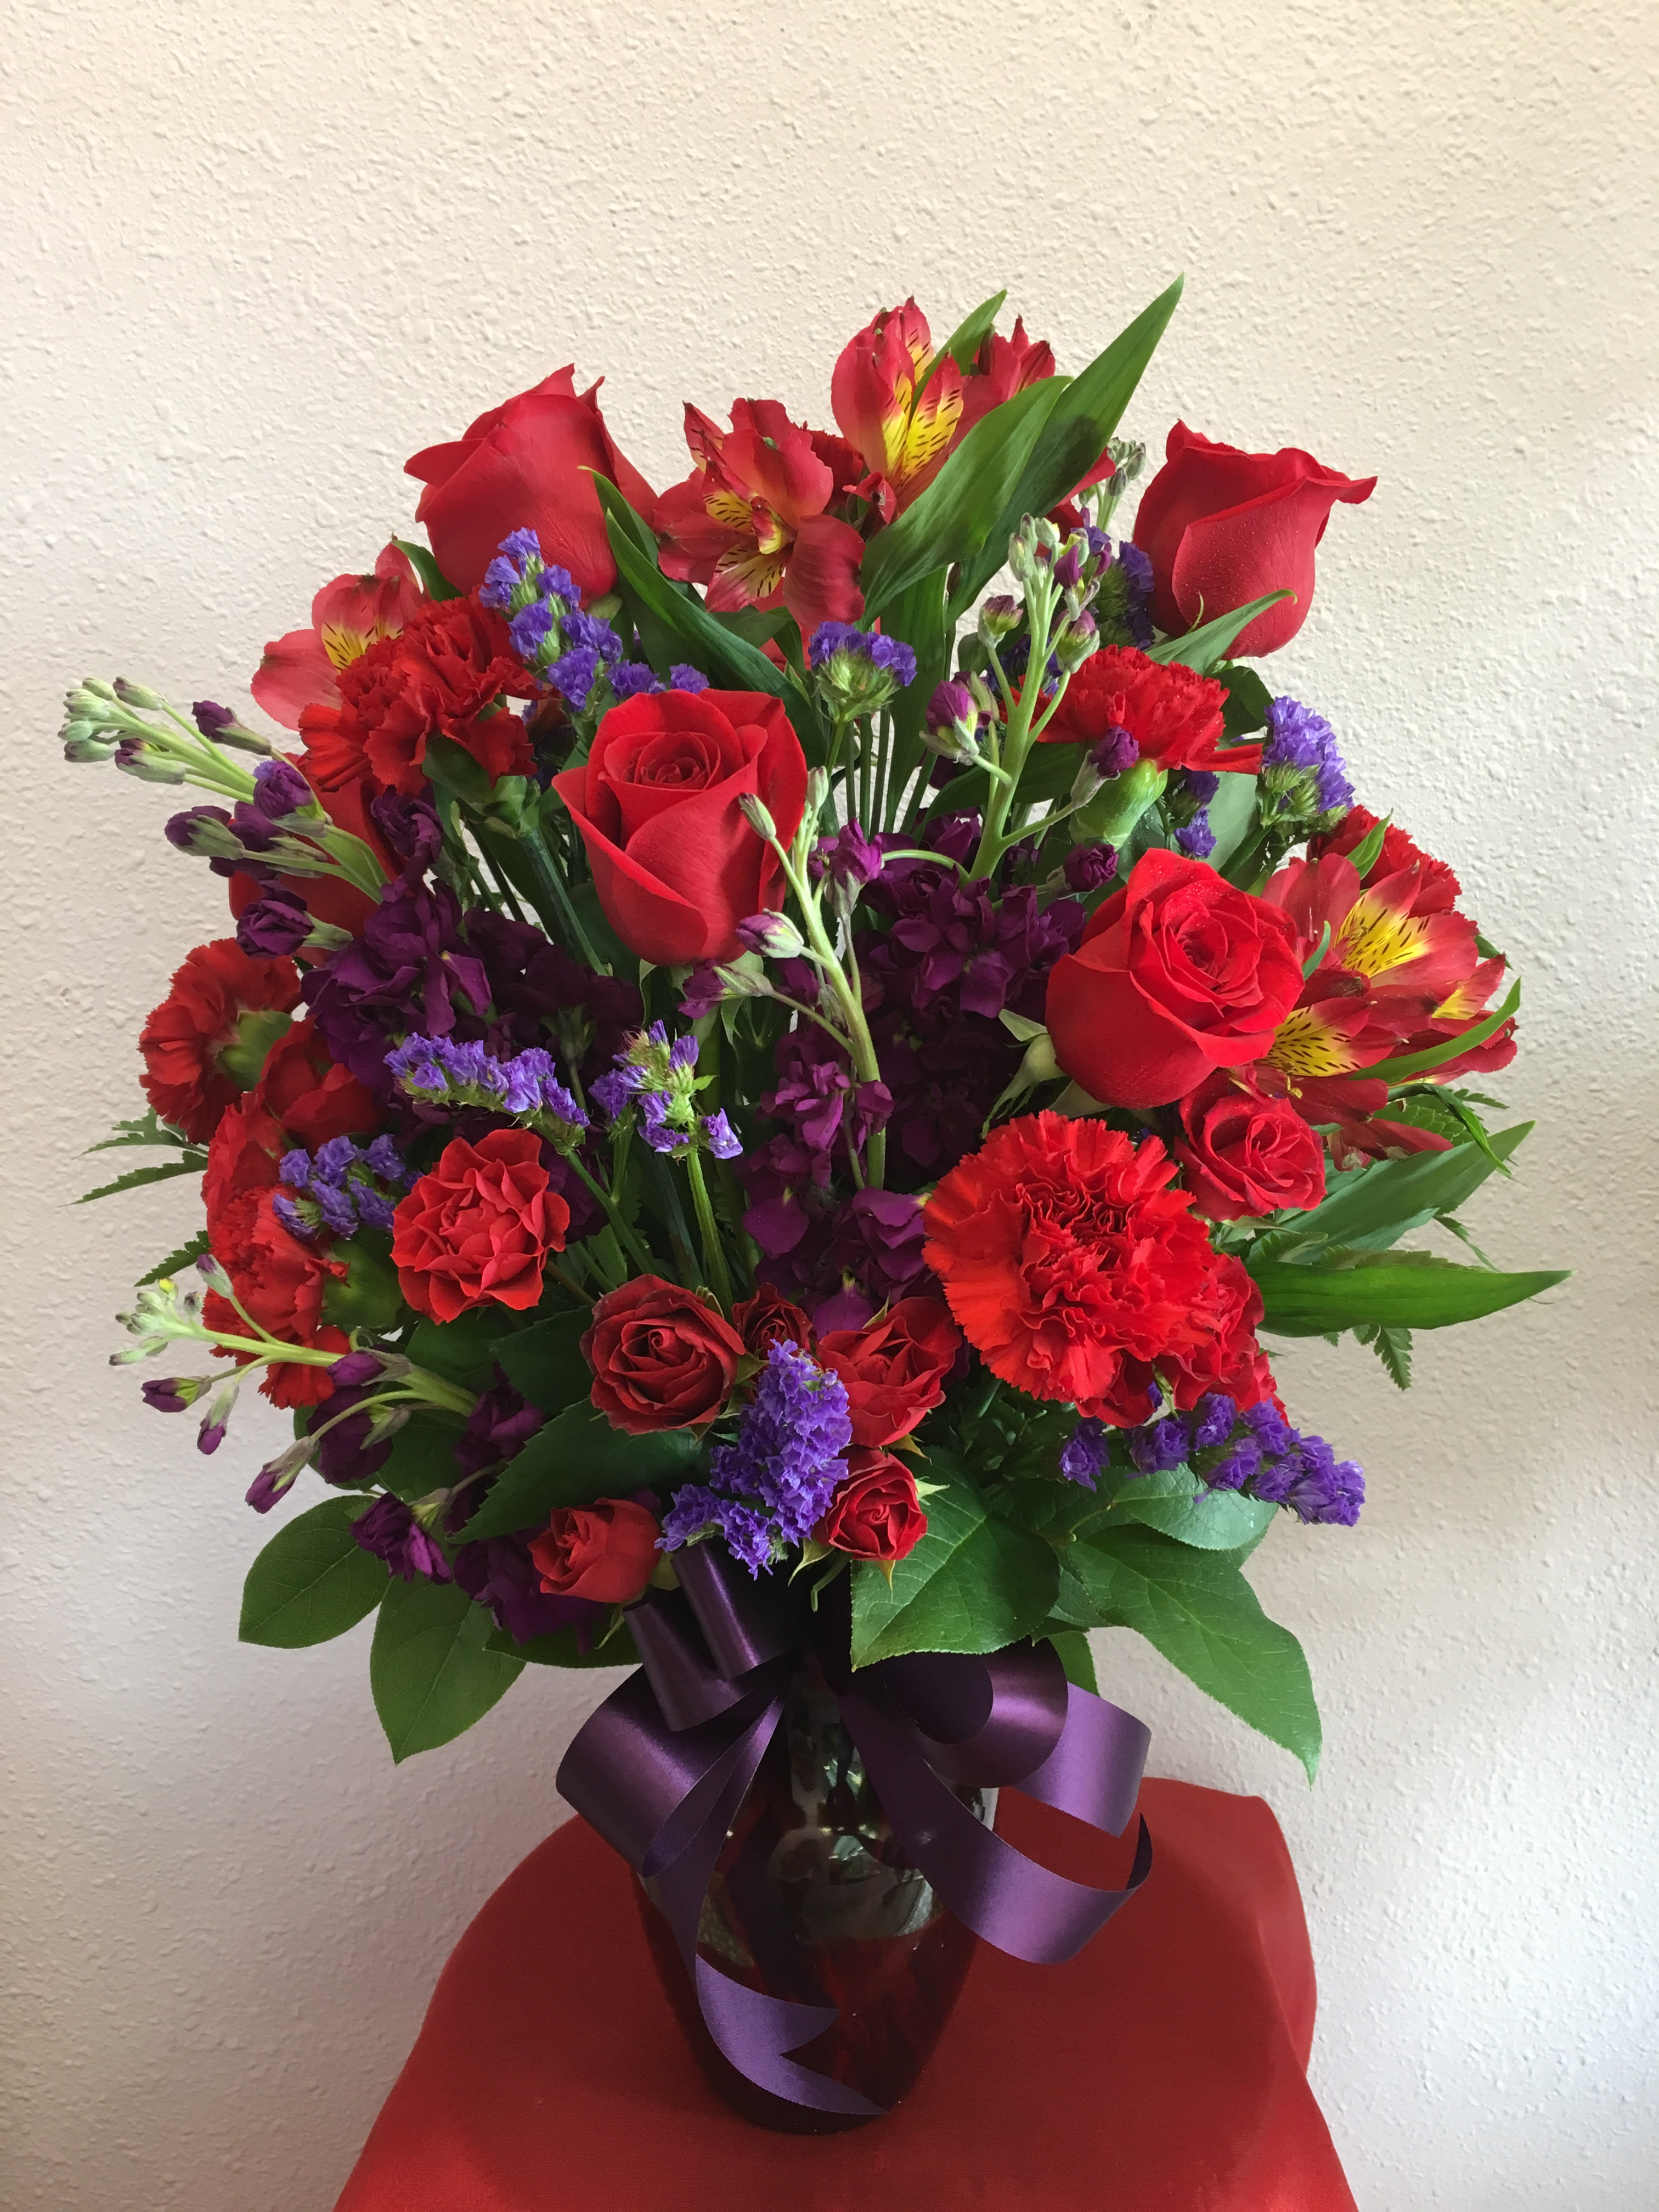 Royal Reds By Forever Flowers - Red Roses, Spray Roses, purple Stock, and pink Alstroemeria with purple accents.